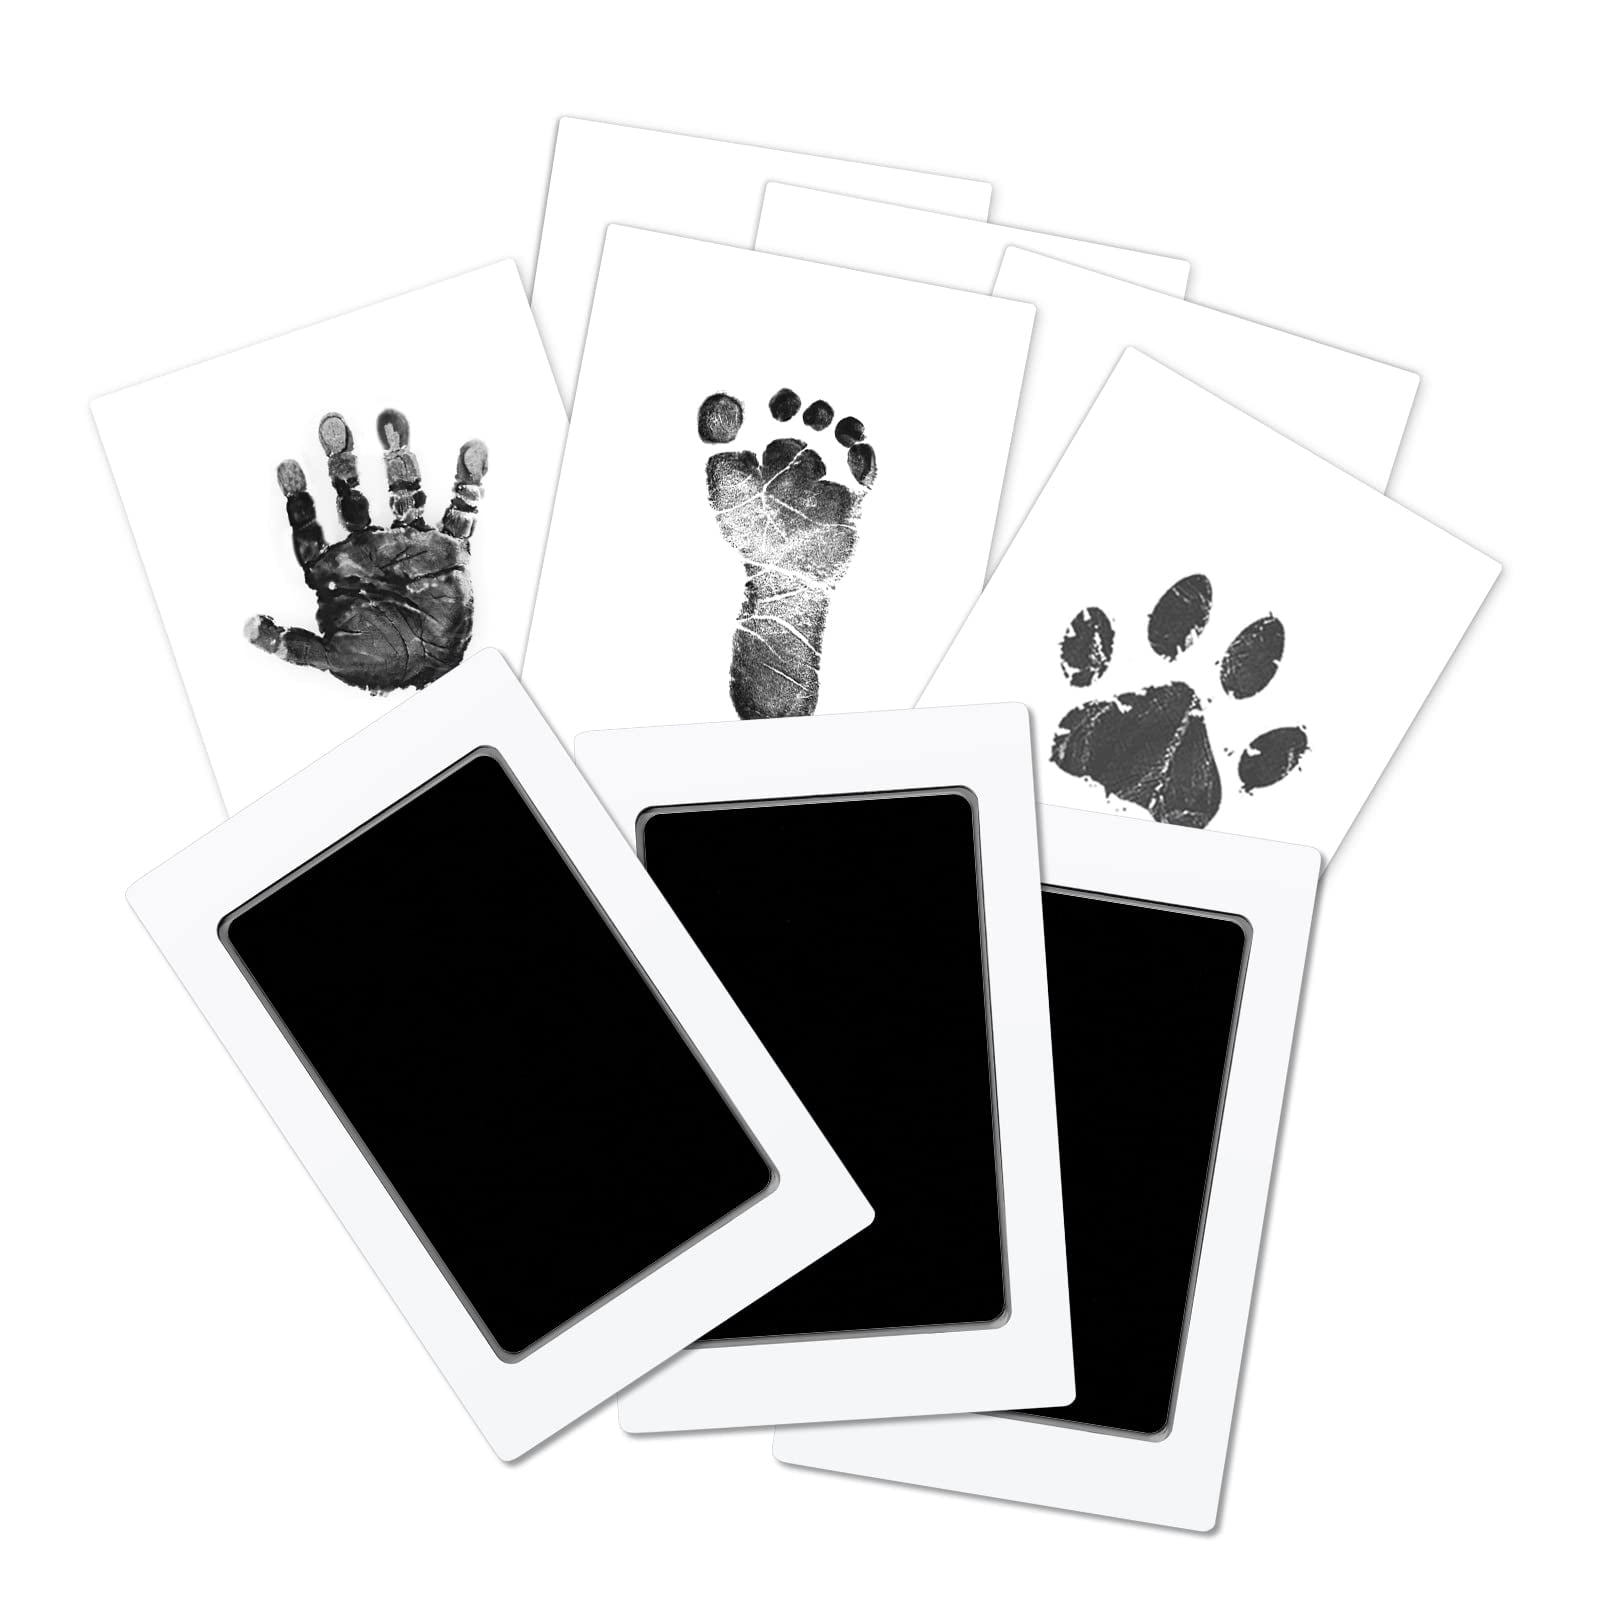 Black 14 Pcs Paw Print Kit Ink Pad for Pet Dog Baby Hand Foot Prints Inkless Clean Touch Ink Pad with 4 Pcs Paw Print Ink Pads and 10 Pcs Imprint Cards Family Memory Gift 